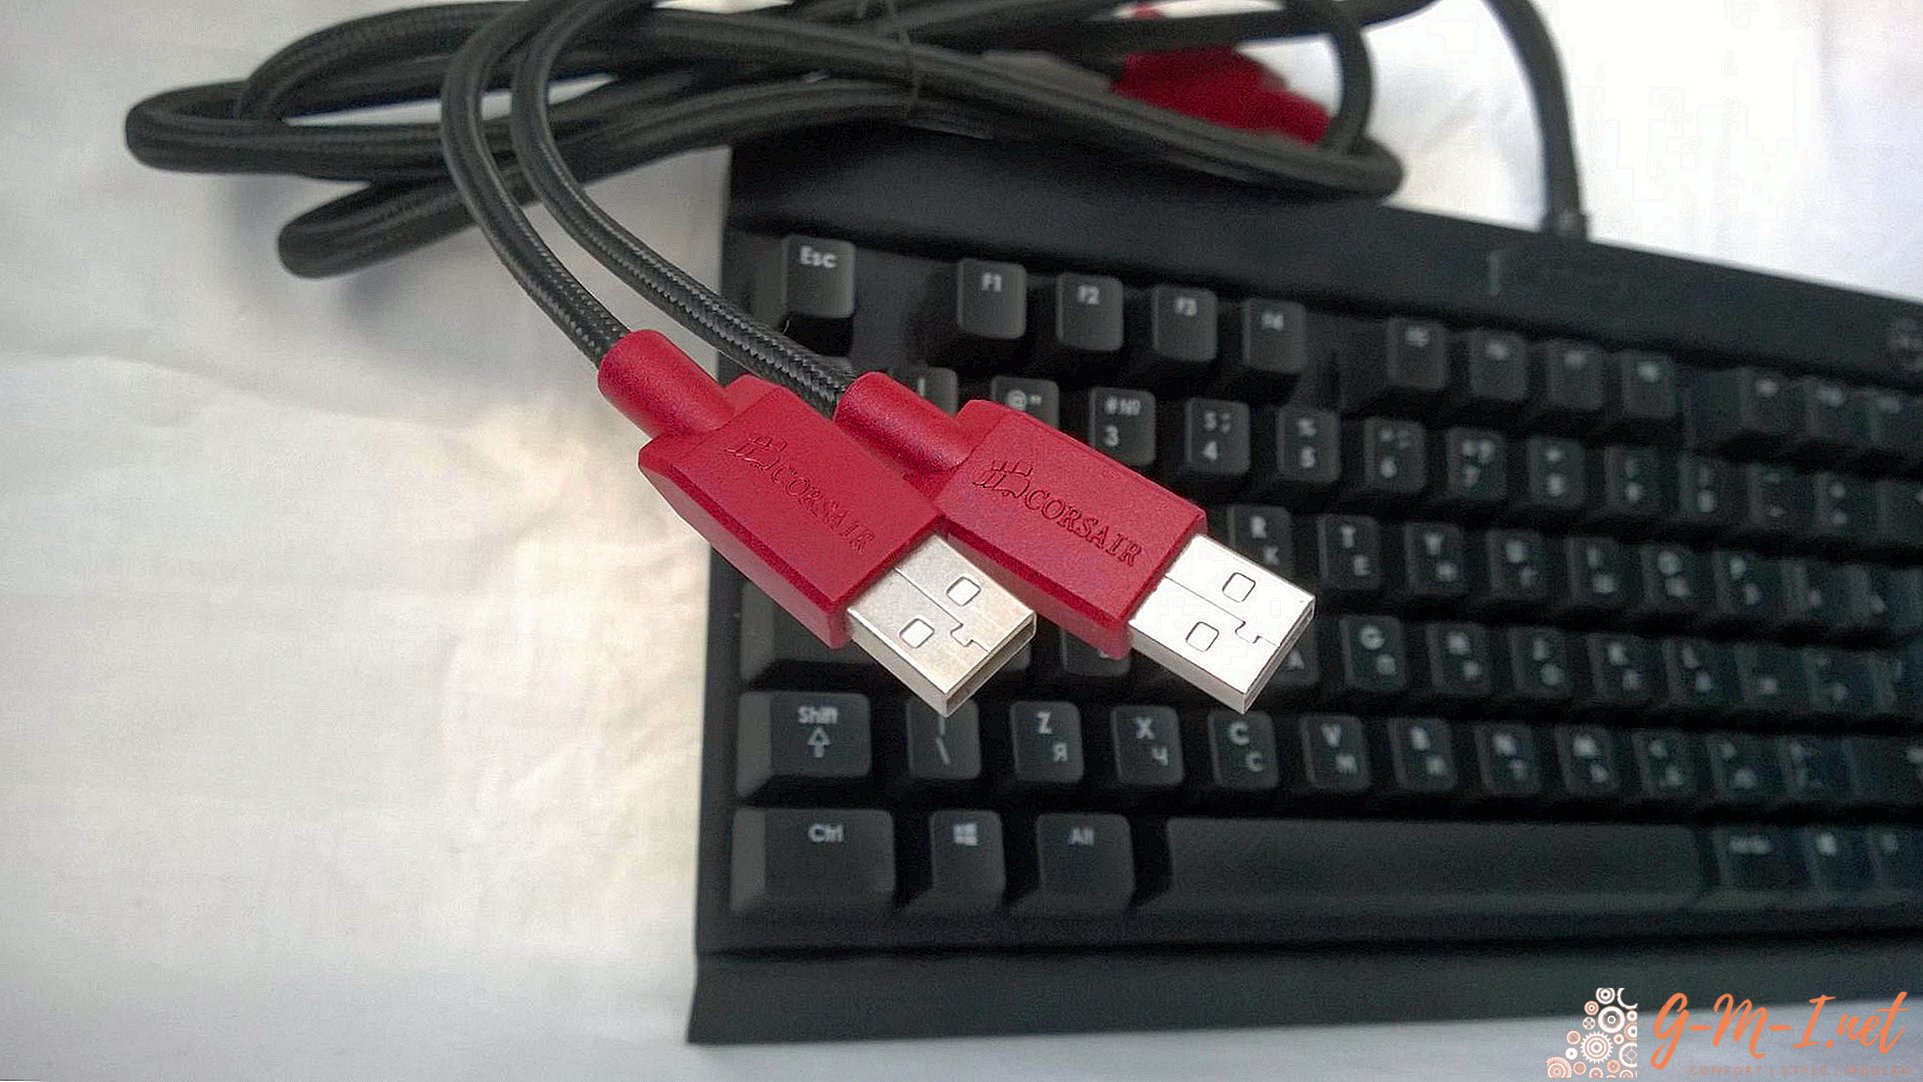 How to connect a keyboard to a computer